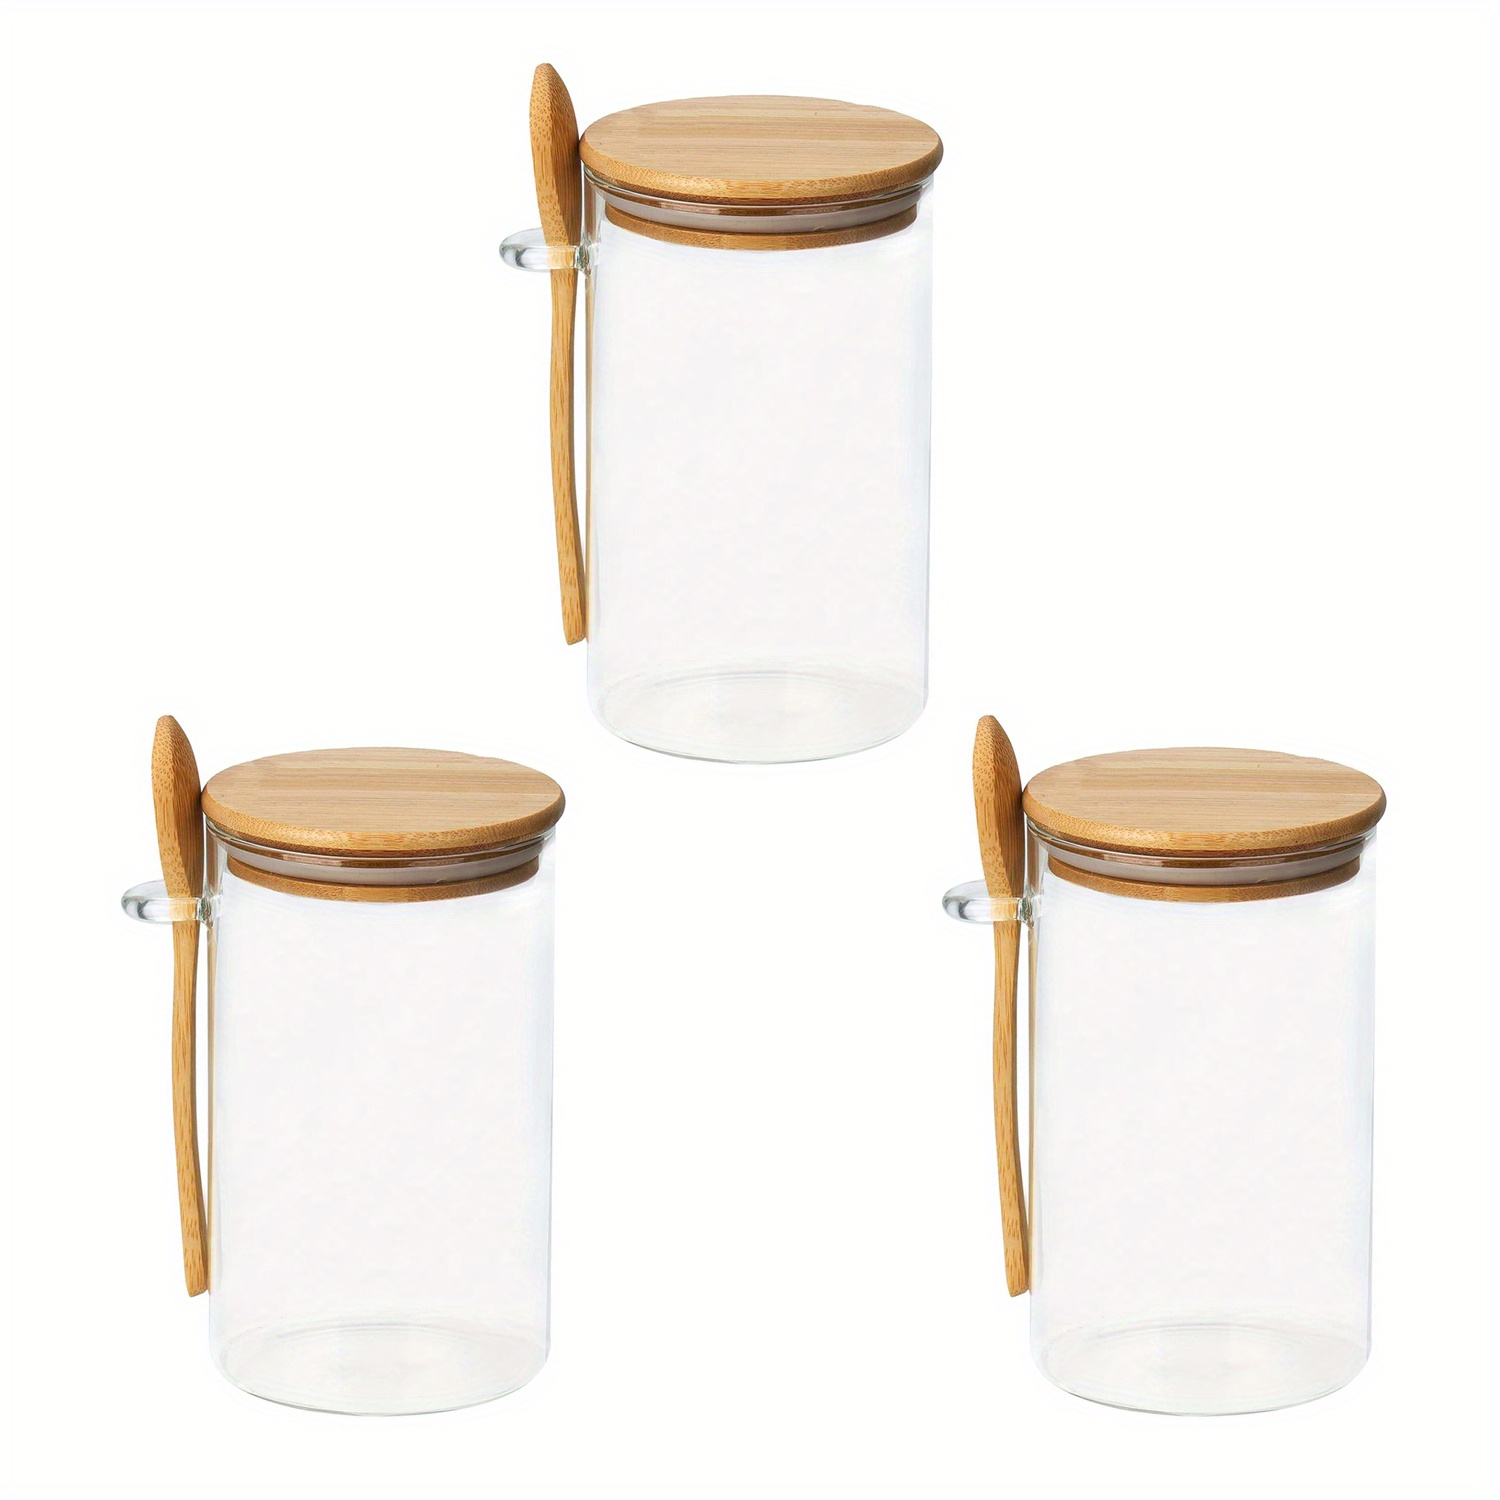  20 oz Glass Spice Jars with Bamboo Lid,6 Pack Kitchen Food  Storage Canister for Spices,Coffee Beans,Tea, Nuts and Candy: Home & Kitchen